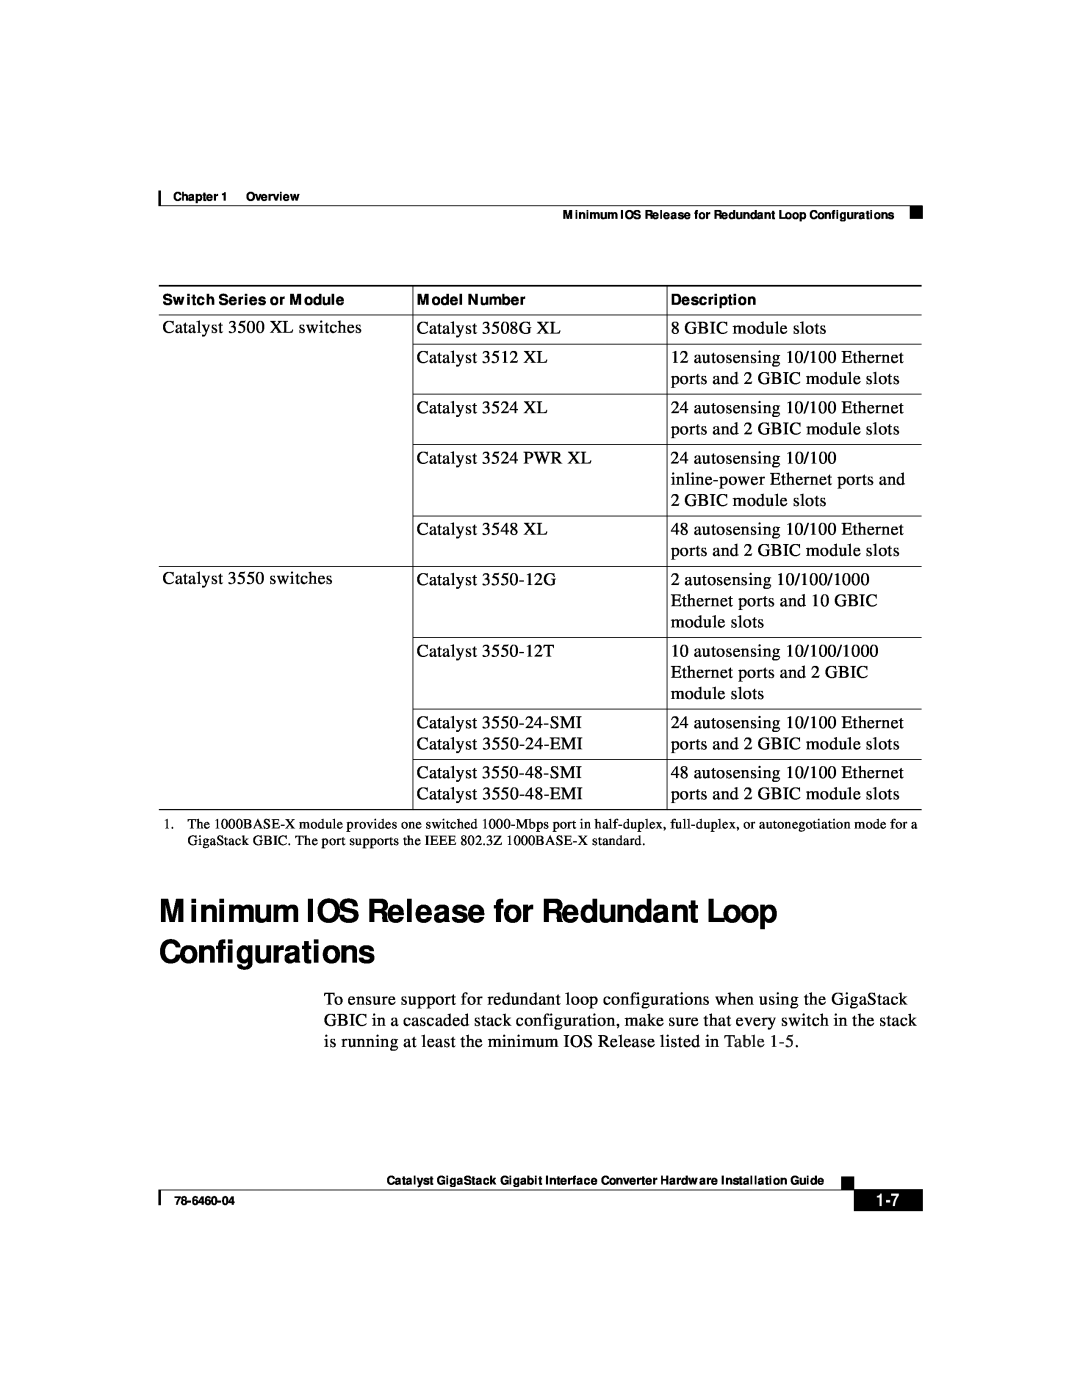 Cisco Systems WS-X3500-XL Minimum IOS Release for Redundant Loop Configurations, Switch Series or Module, Model Number 